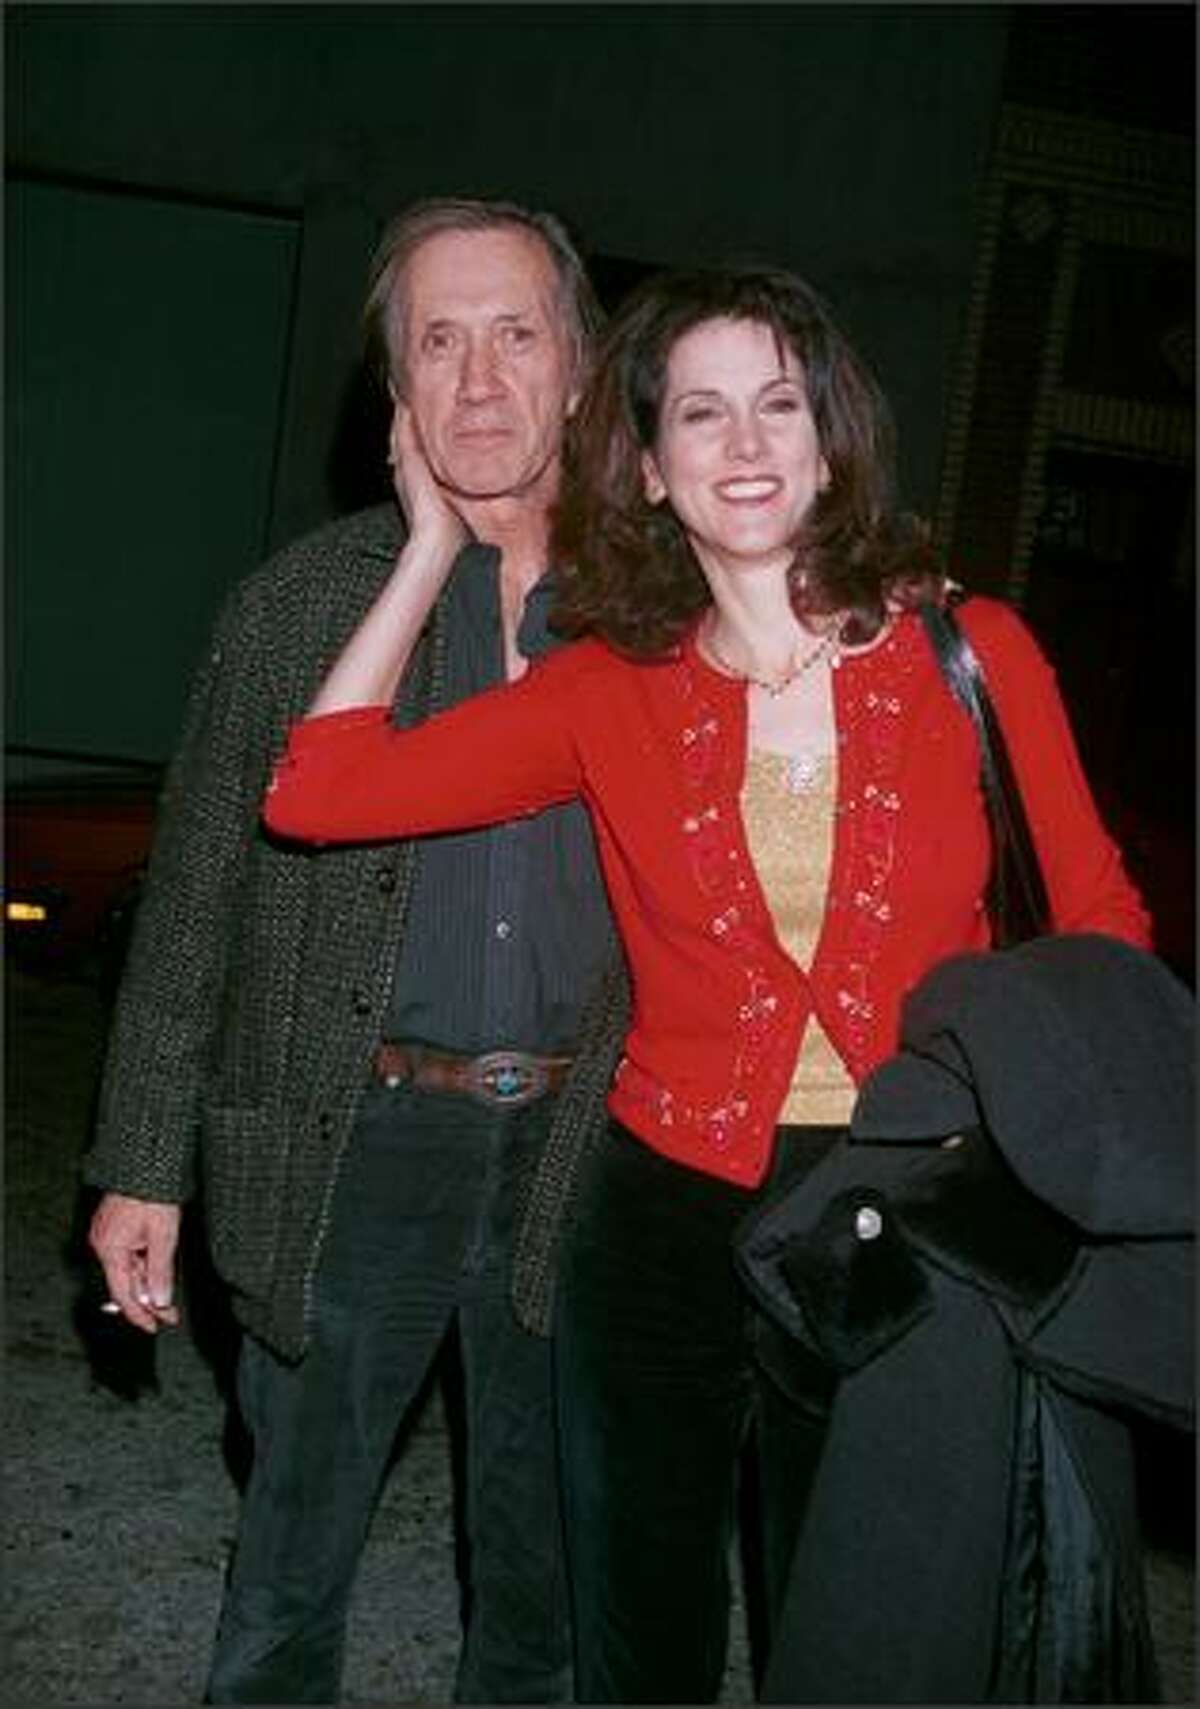 Actor David Carradine and his fourth wife, Marina, attend a party and final shoot for "Joe Head Goes Hollywood" Dec. 17, 2000 in Venice, Calif. (Photo by Newsmakers)